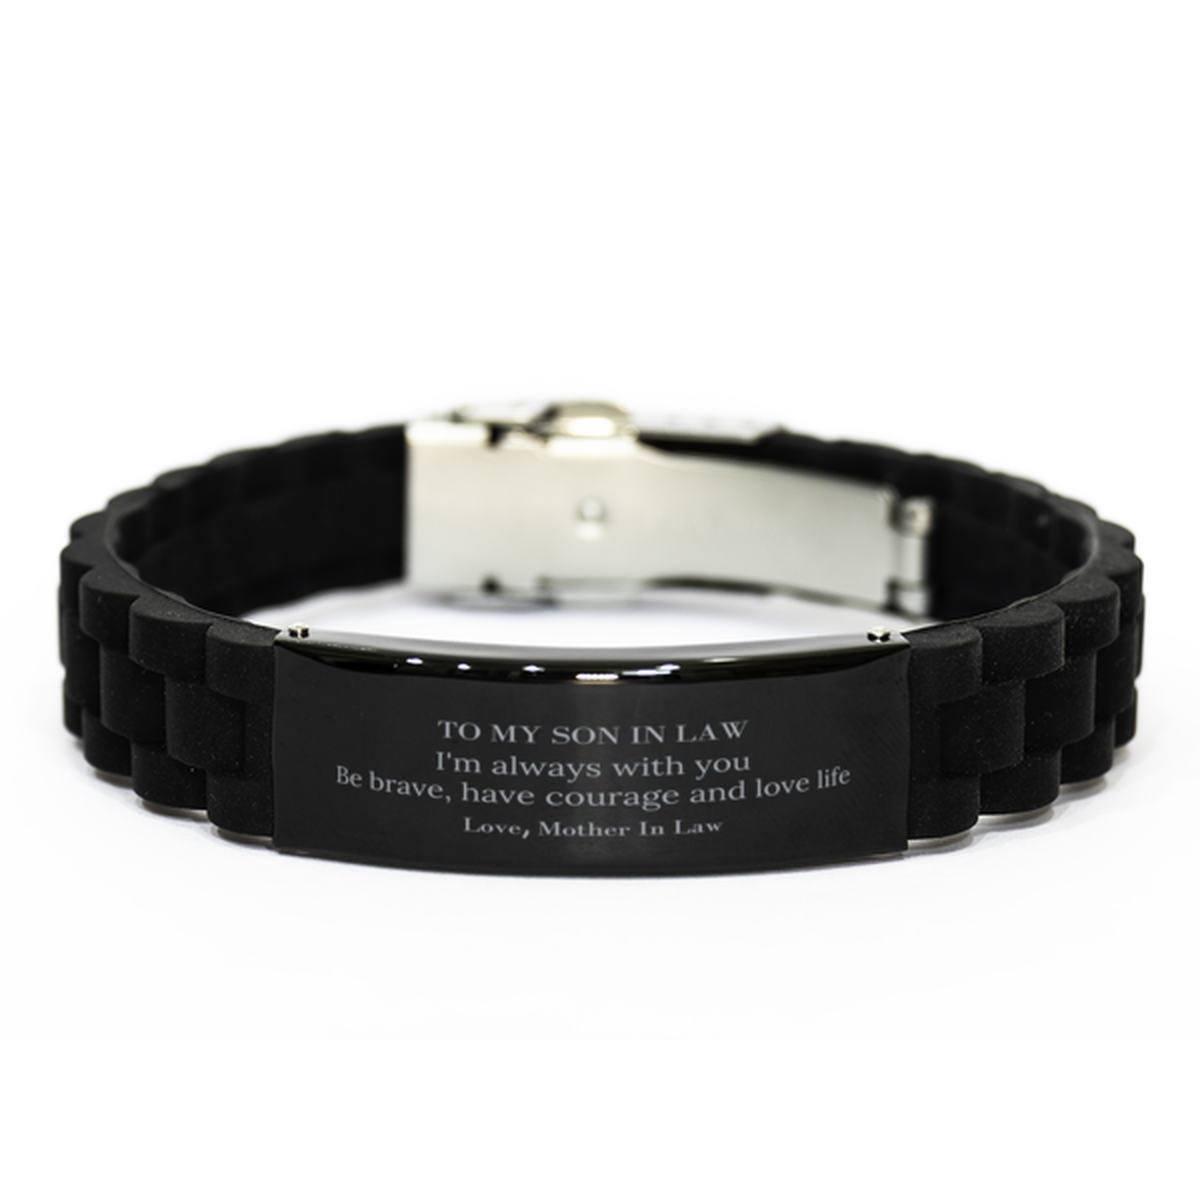 To My Son In Law Gifts from Mother In Law, Unique Black Glidelock Clasp Bracelet Inspirational Christmas Birthday Graduation Gifts for Son In Law I'm always with you. Be brave, have courage and love life. Love, Mother In Law